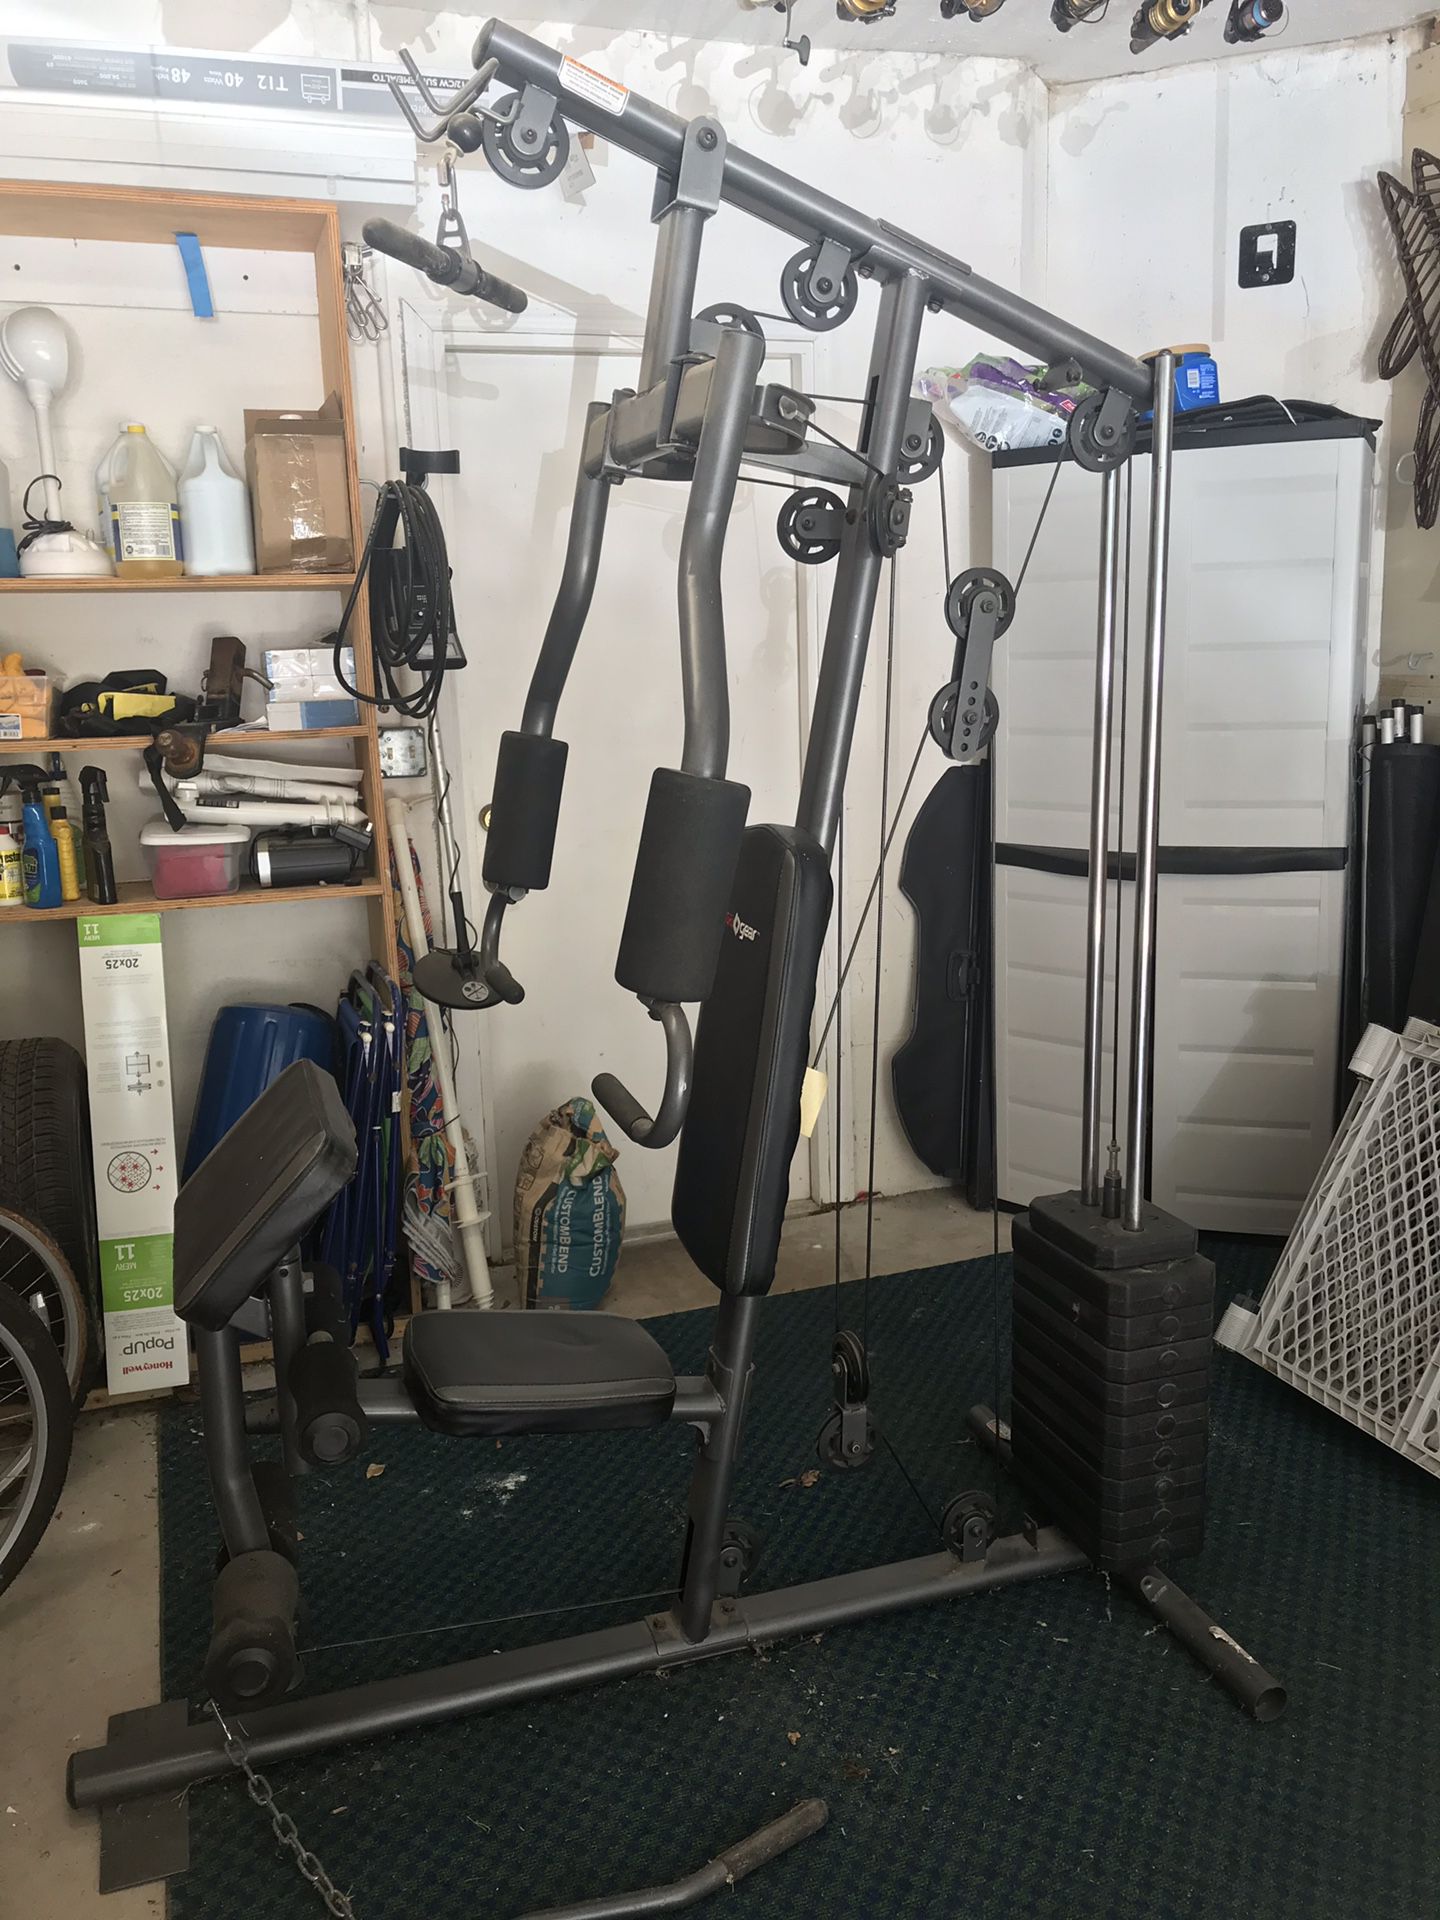 Home gym $225 great condition